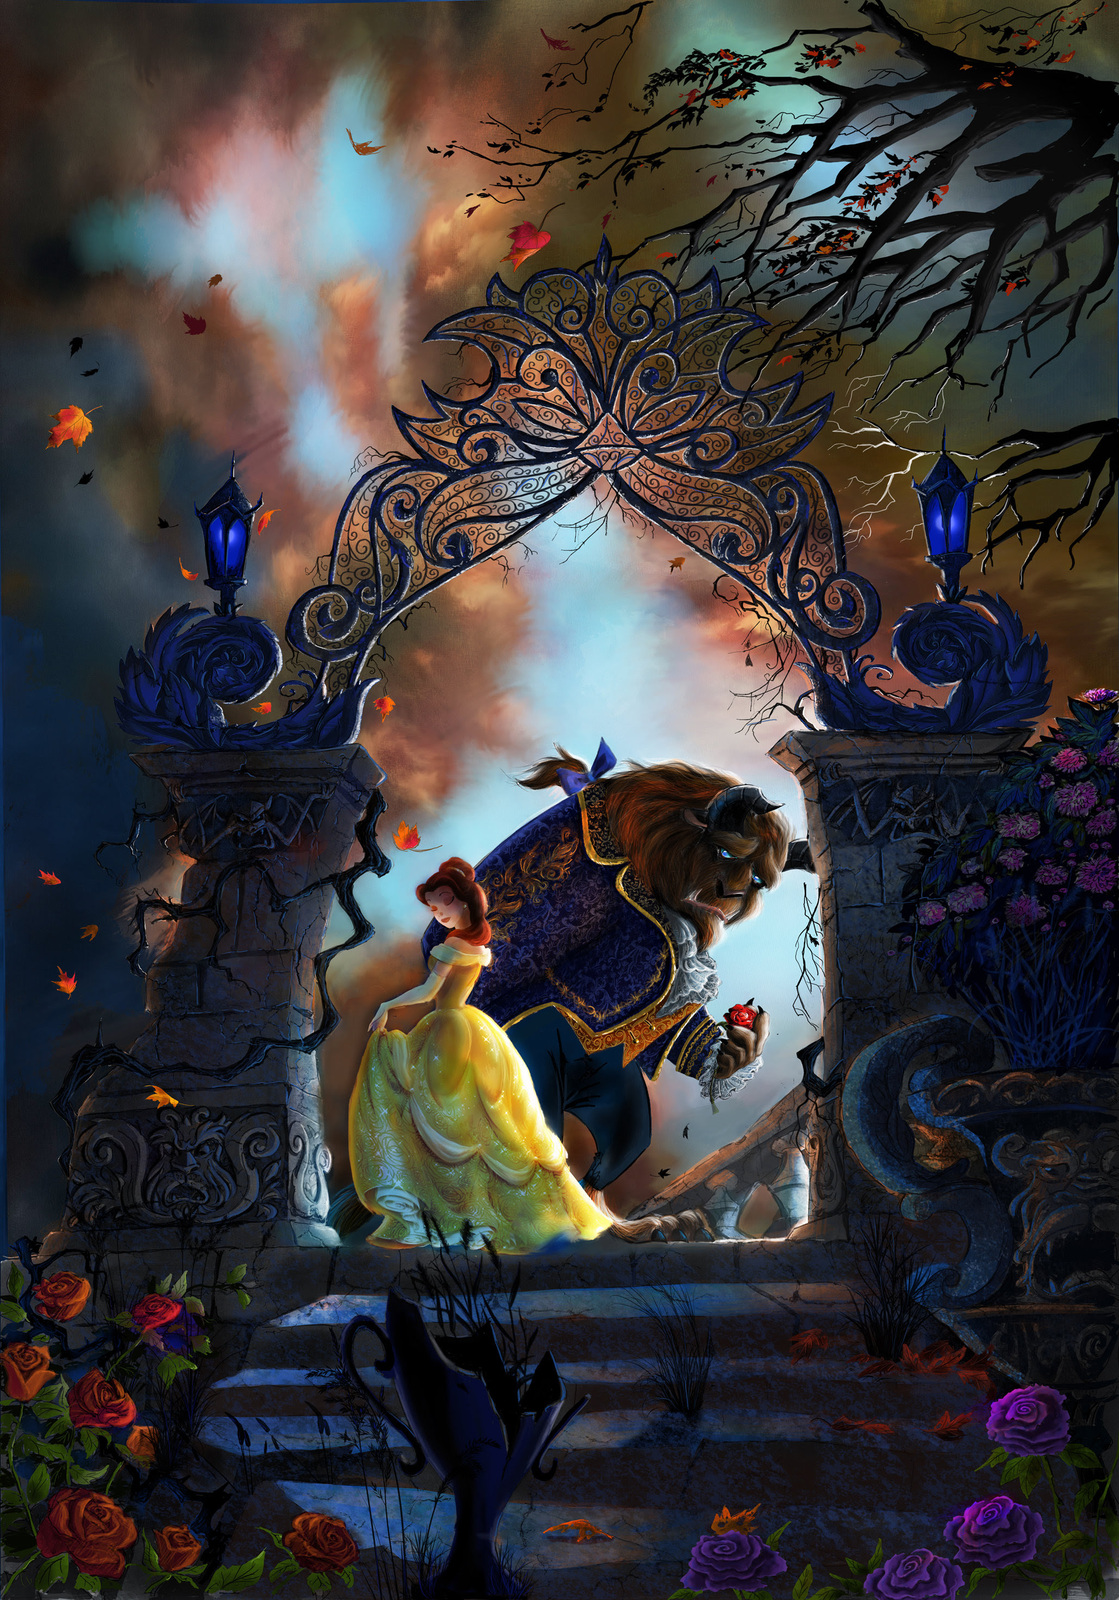 "Beauty and the Beast" by Guy Vasilovich Giclee Print